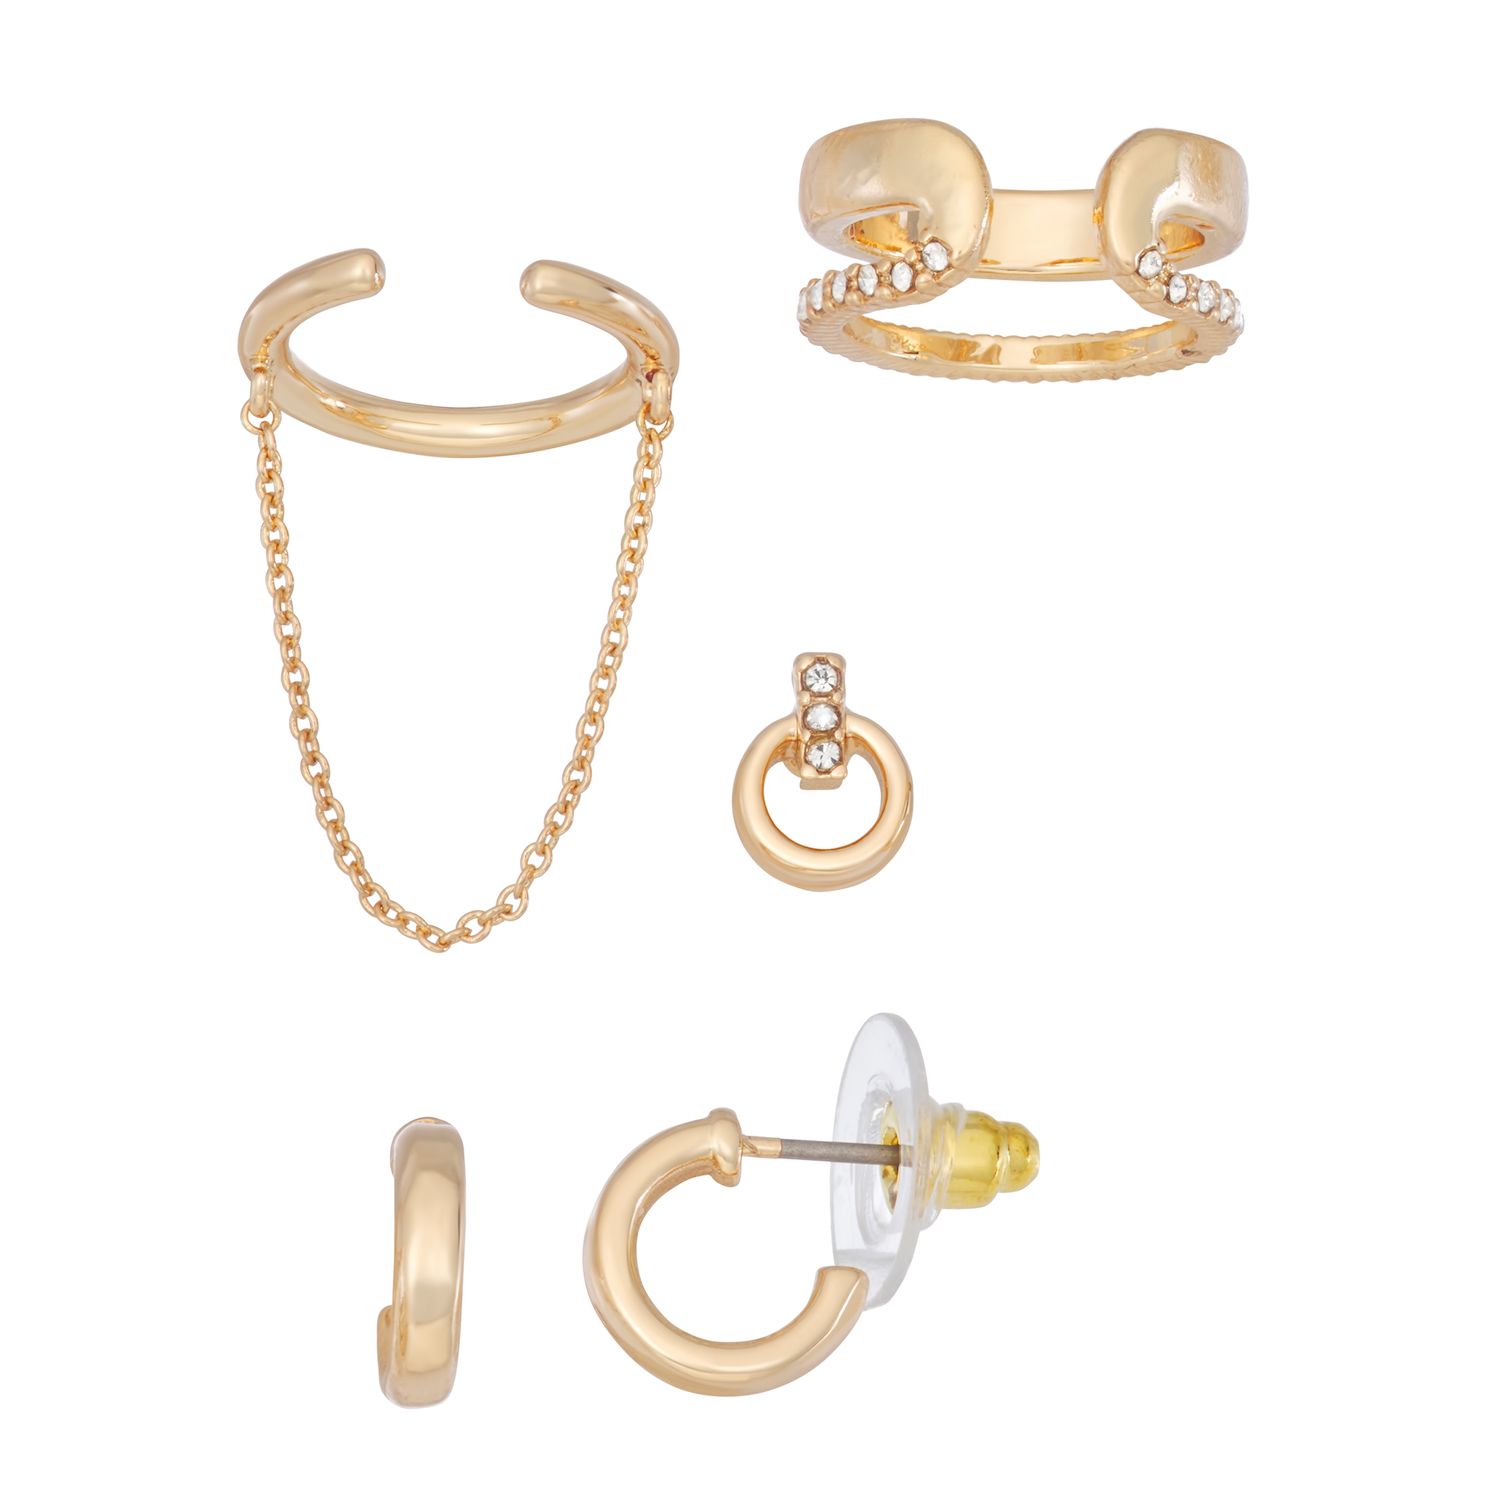 Image for LC Lauren Conrad Gold Tone 5-Pack Mini Hoops, Post and Cuff Earring Set at Kohl's.